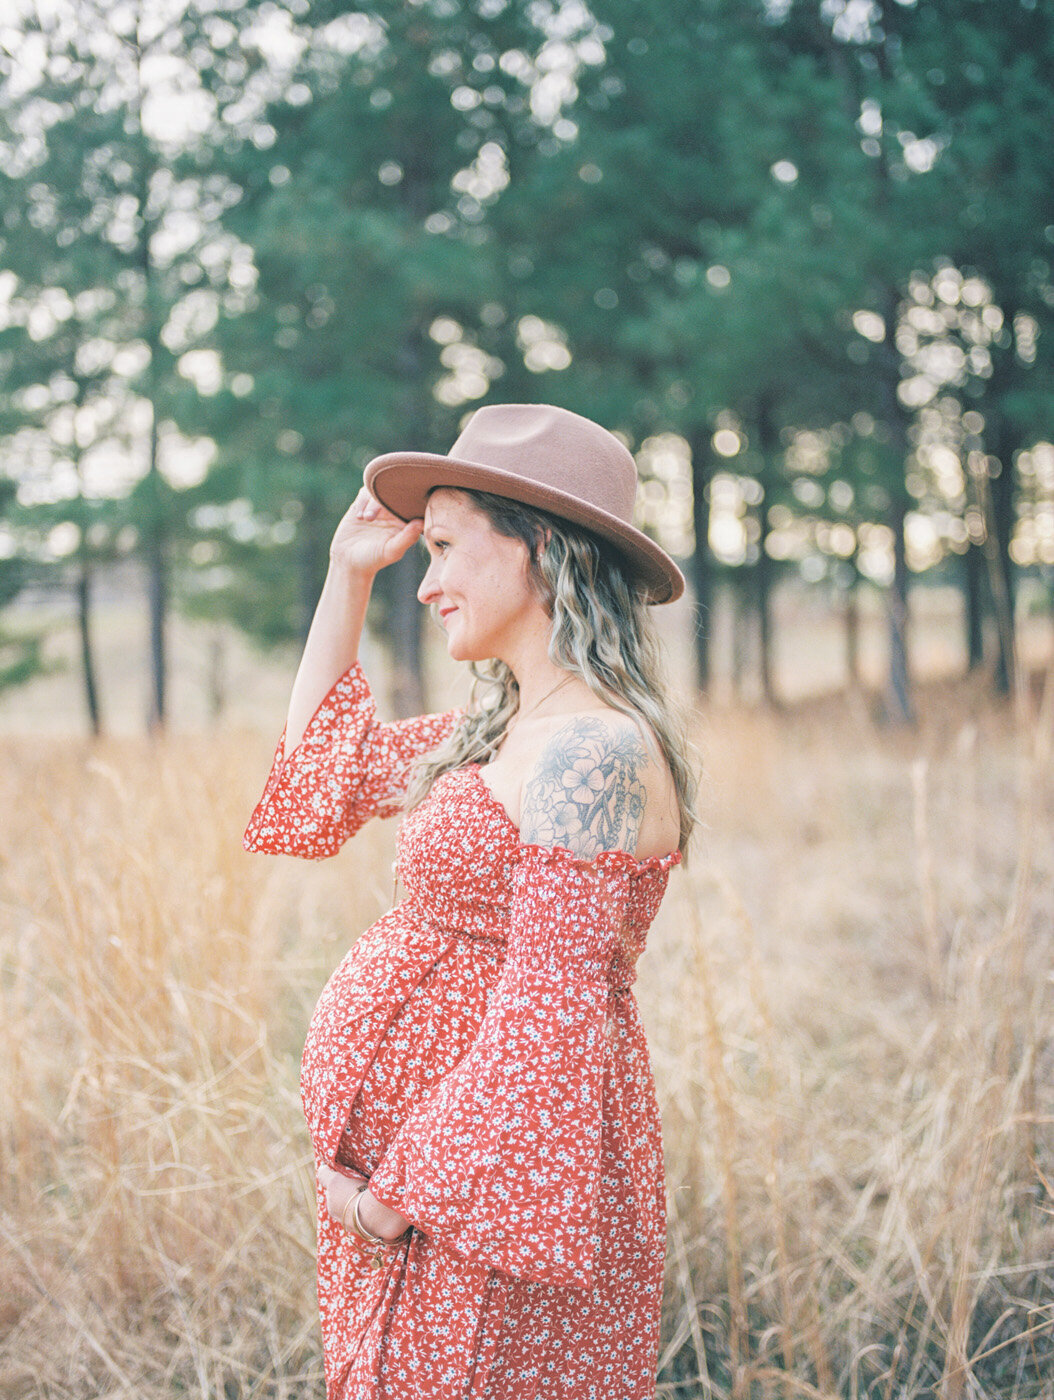 Raleigh Maternity Photographer | Jessica Agee Photography - 003